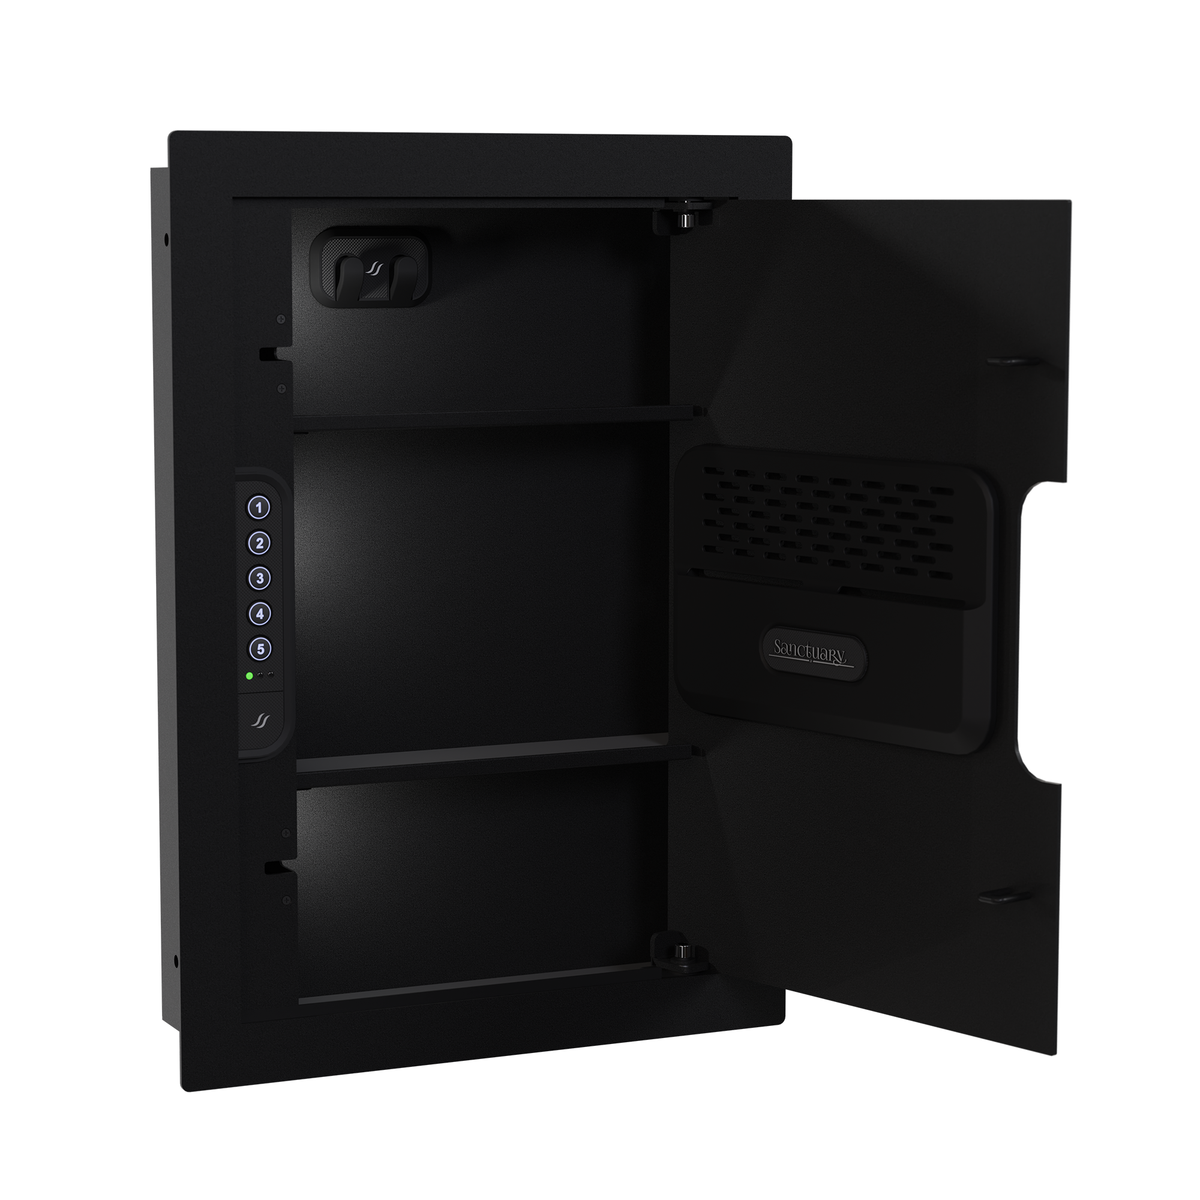 Sports Afield SA-IWV-B Sanctuary In-Wall Safe Door Open